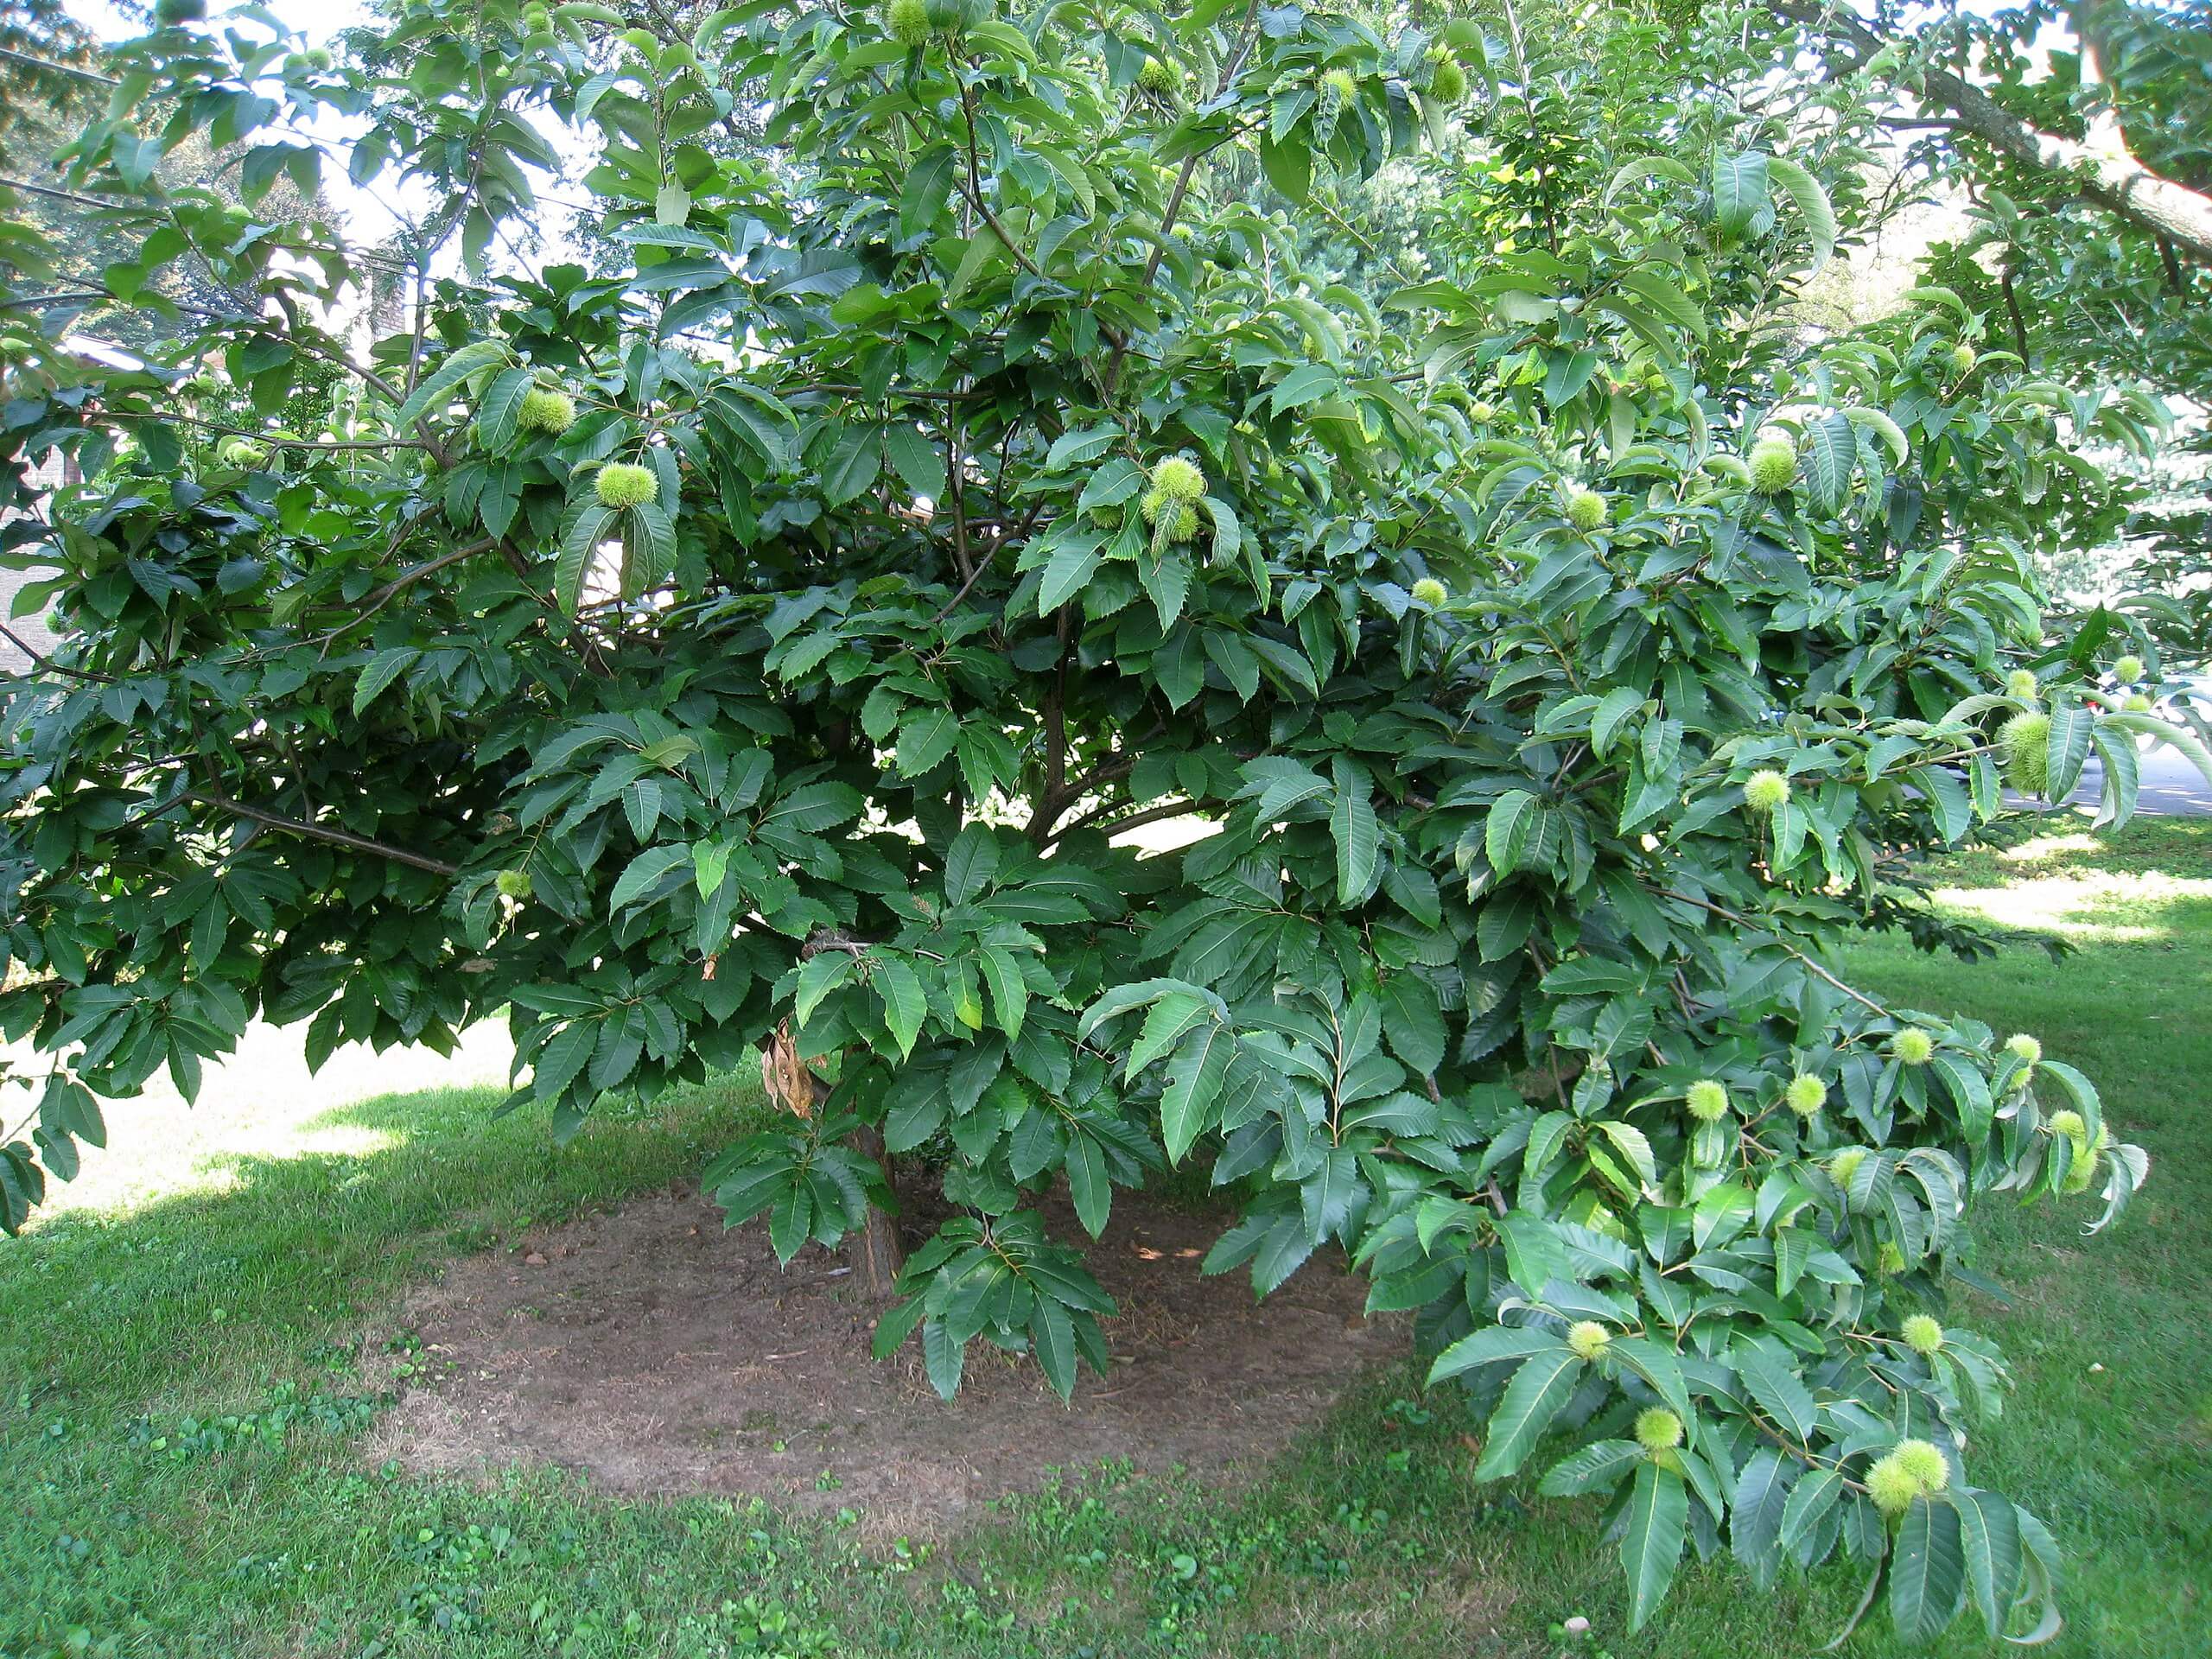 A Small American Chestnut Tree